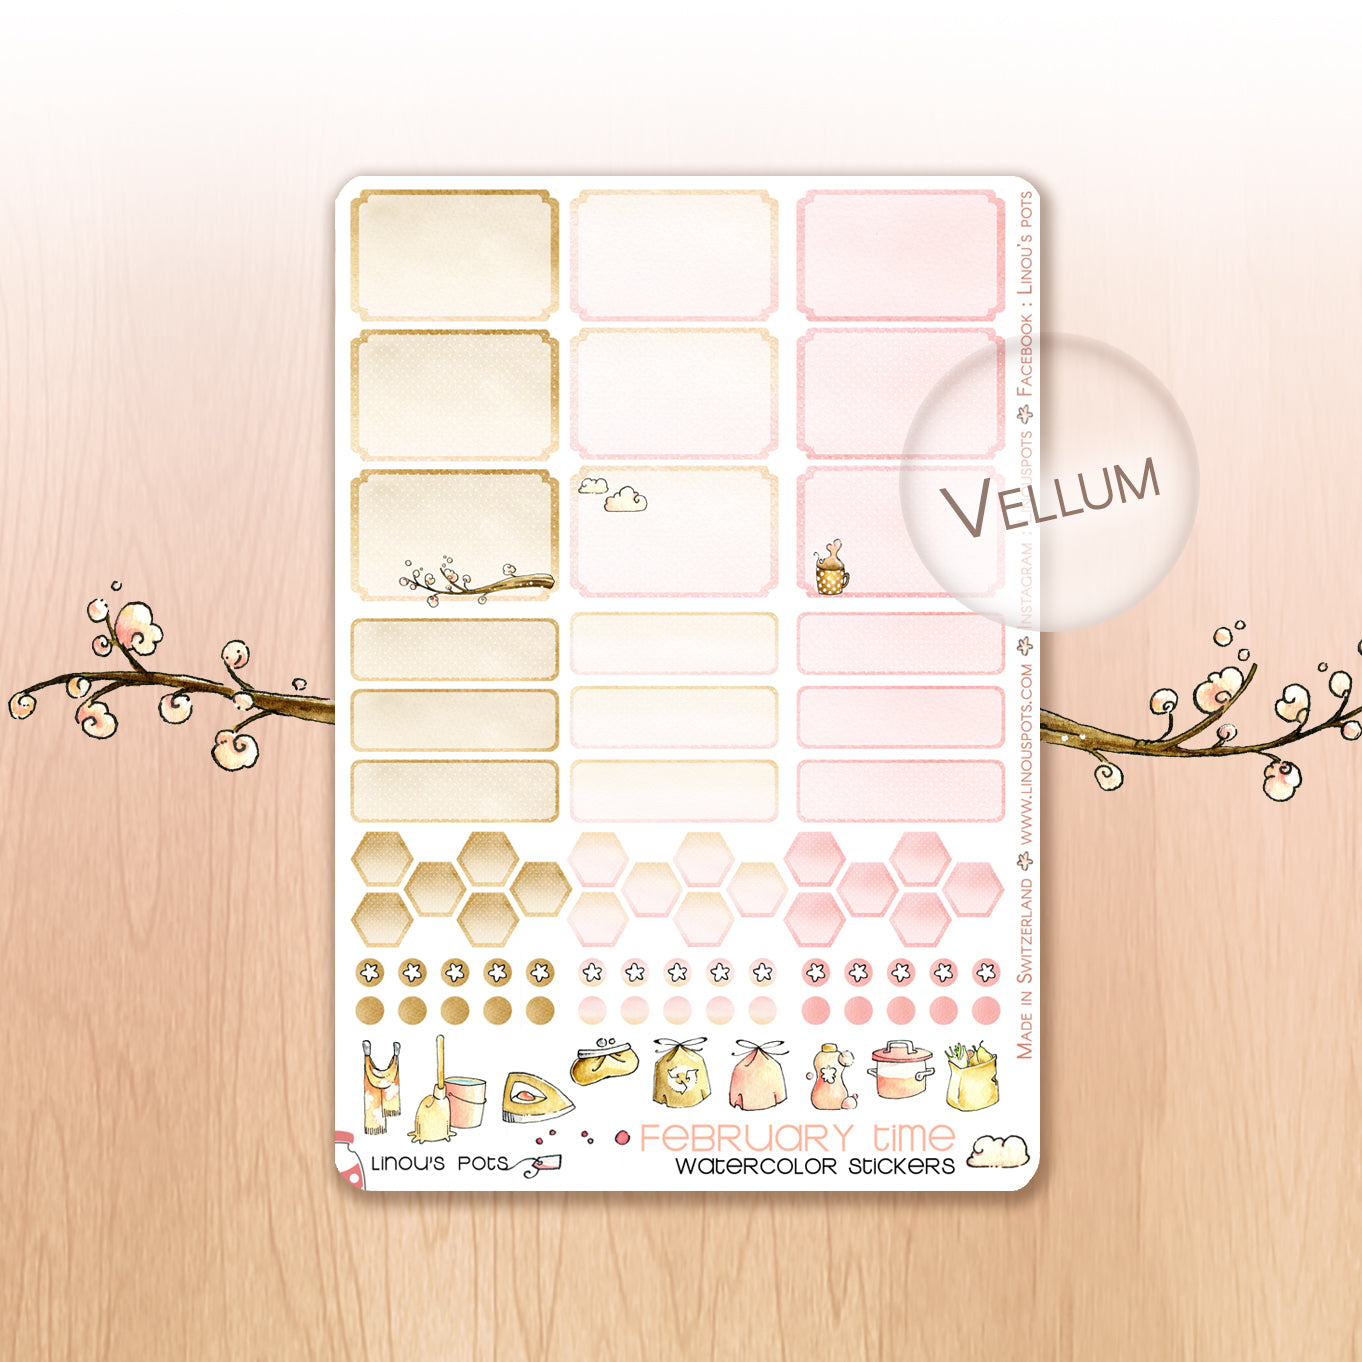 Love Is In The Air - Watercolor Planner Stickers - 1,5’’ wide Hemiboxes &amp; Eventboxes